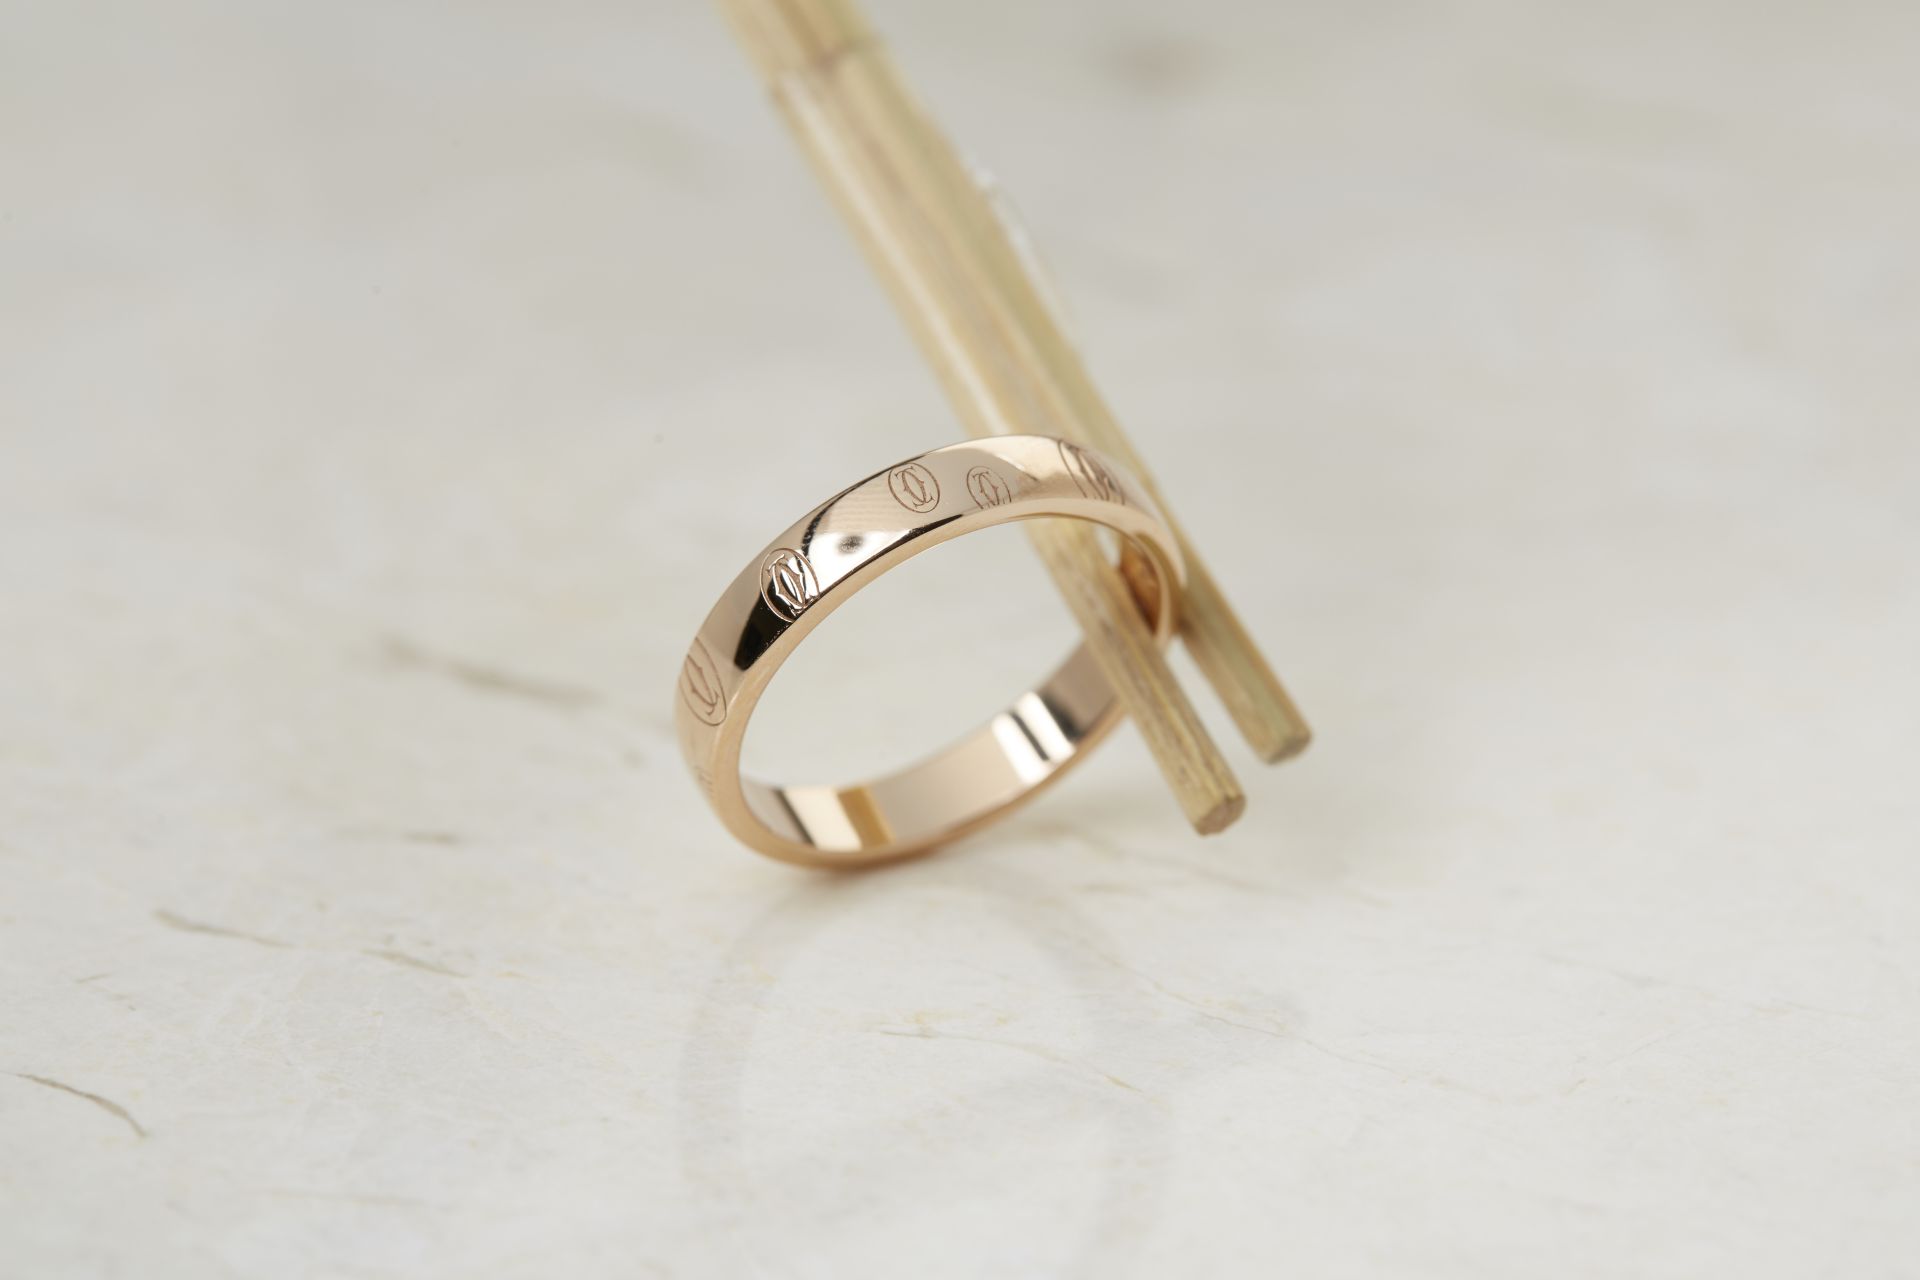 Cartier 18k Rose Gold Double C Logo Design Ring with Presentation Box - Image 2 of 7